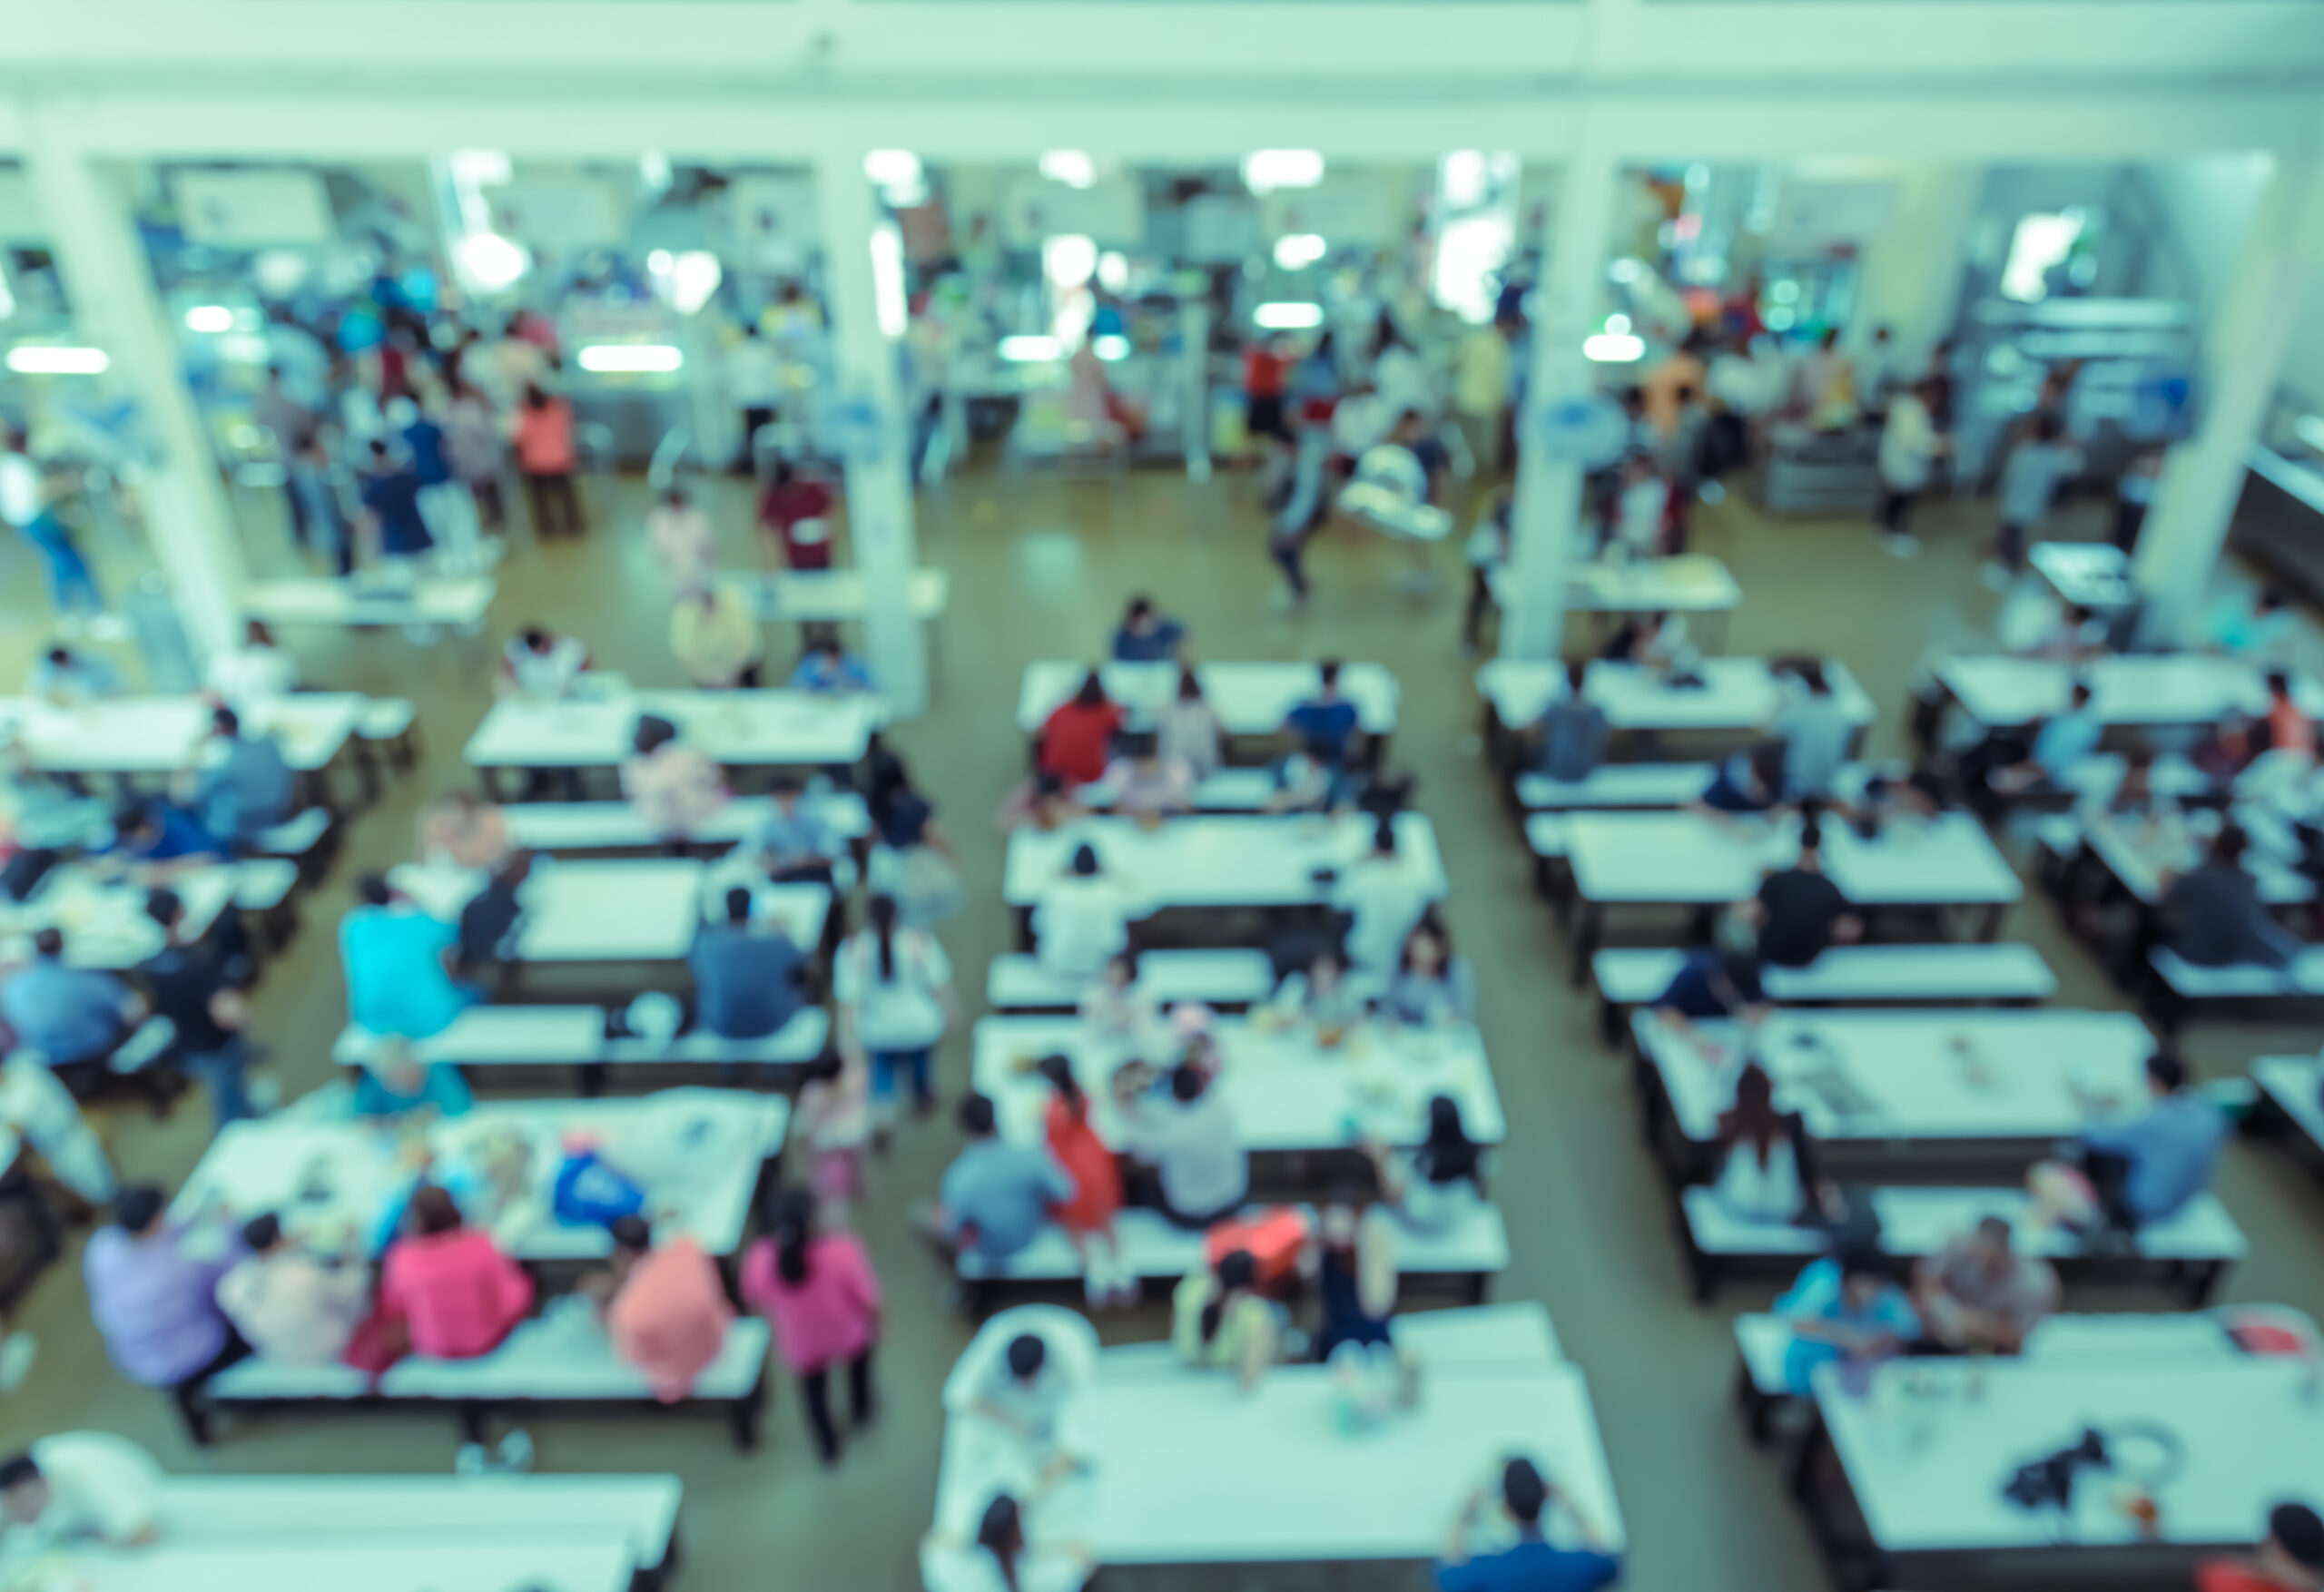 A blurred aerial photo of a school cafeteria, in which kids are eating at tables.